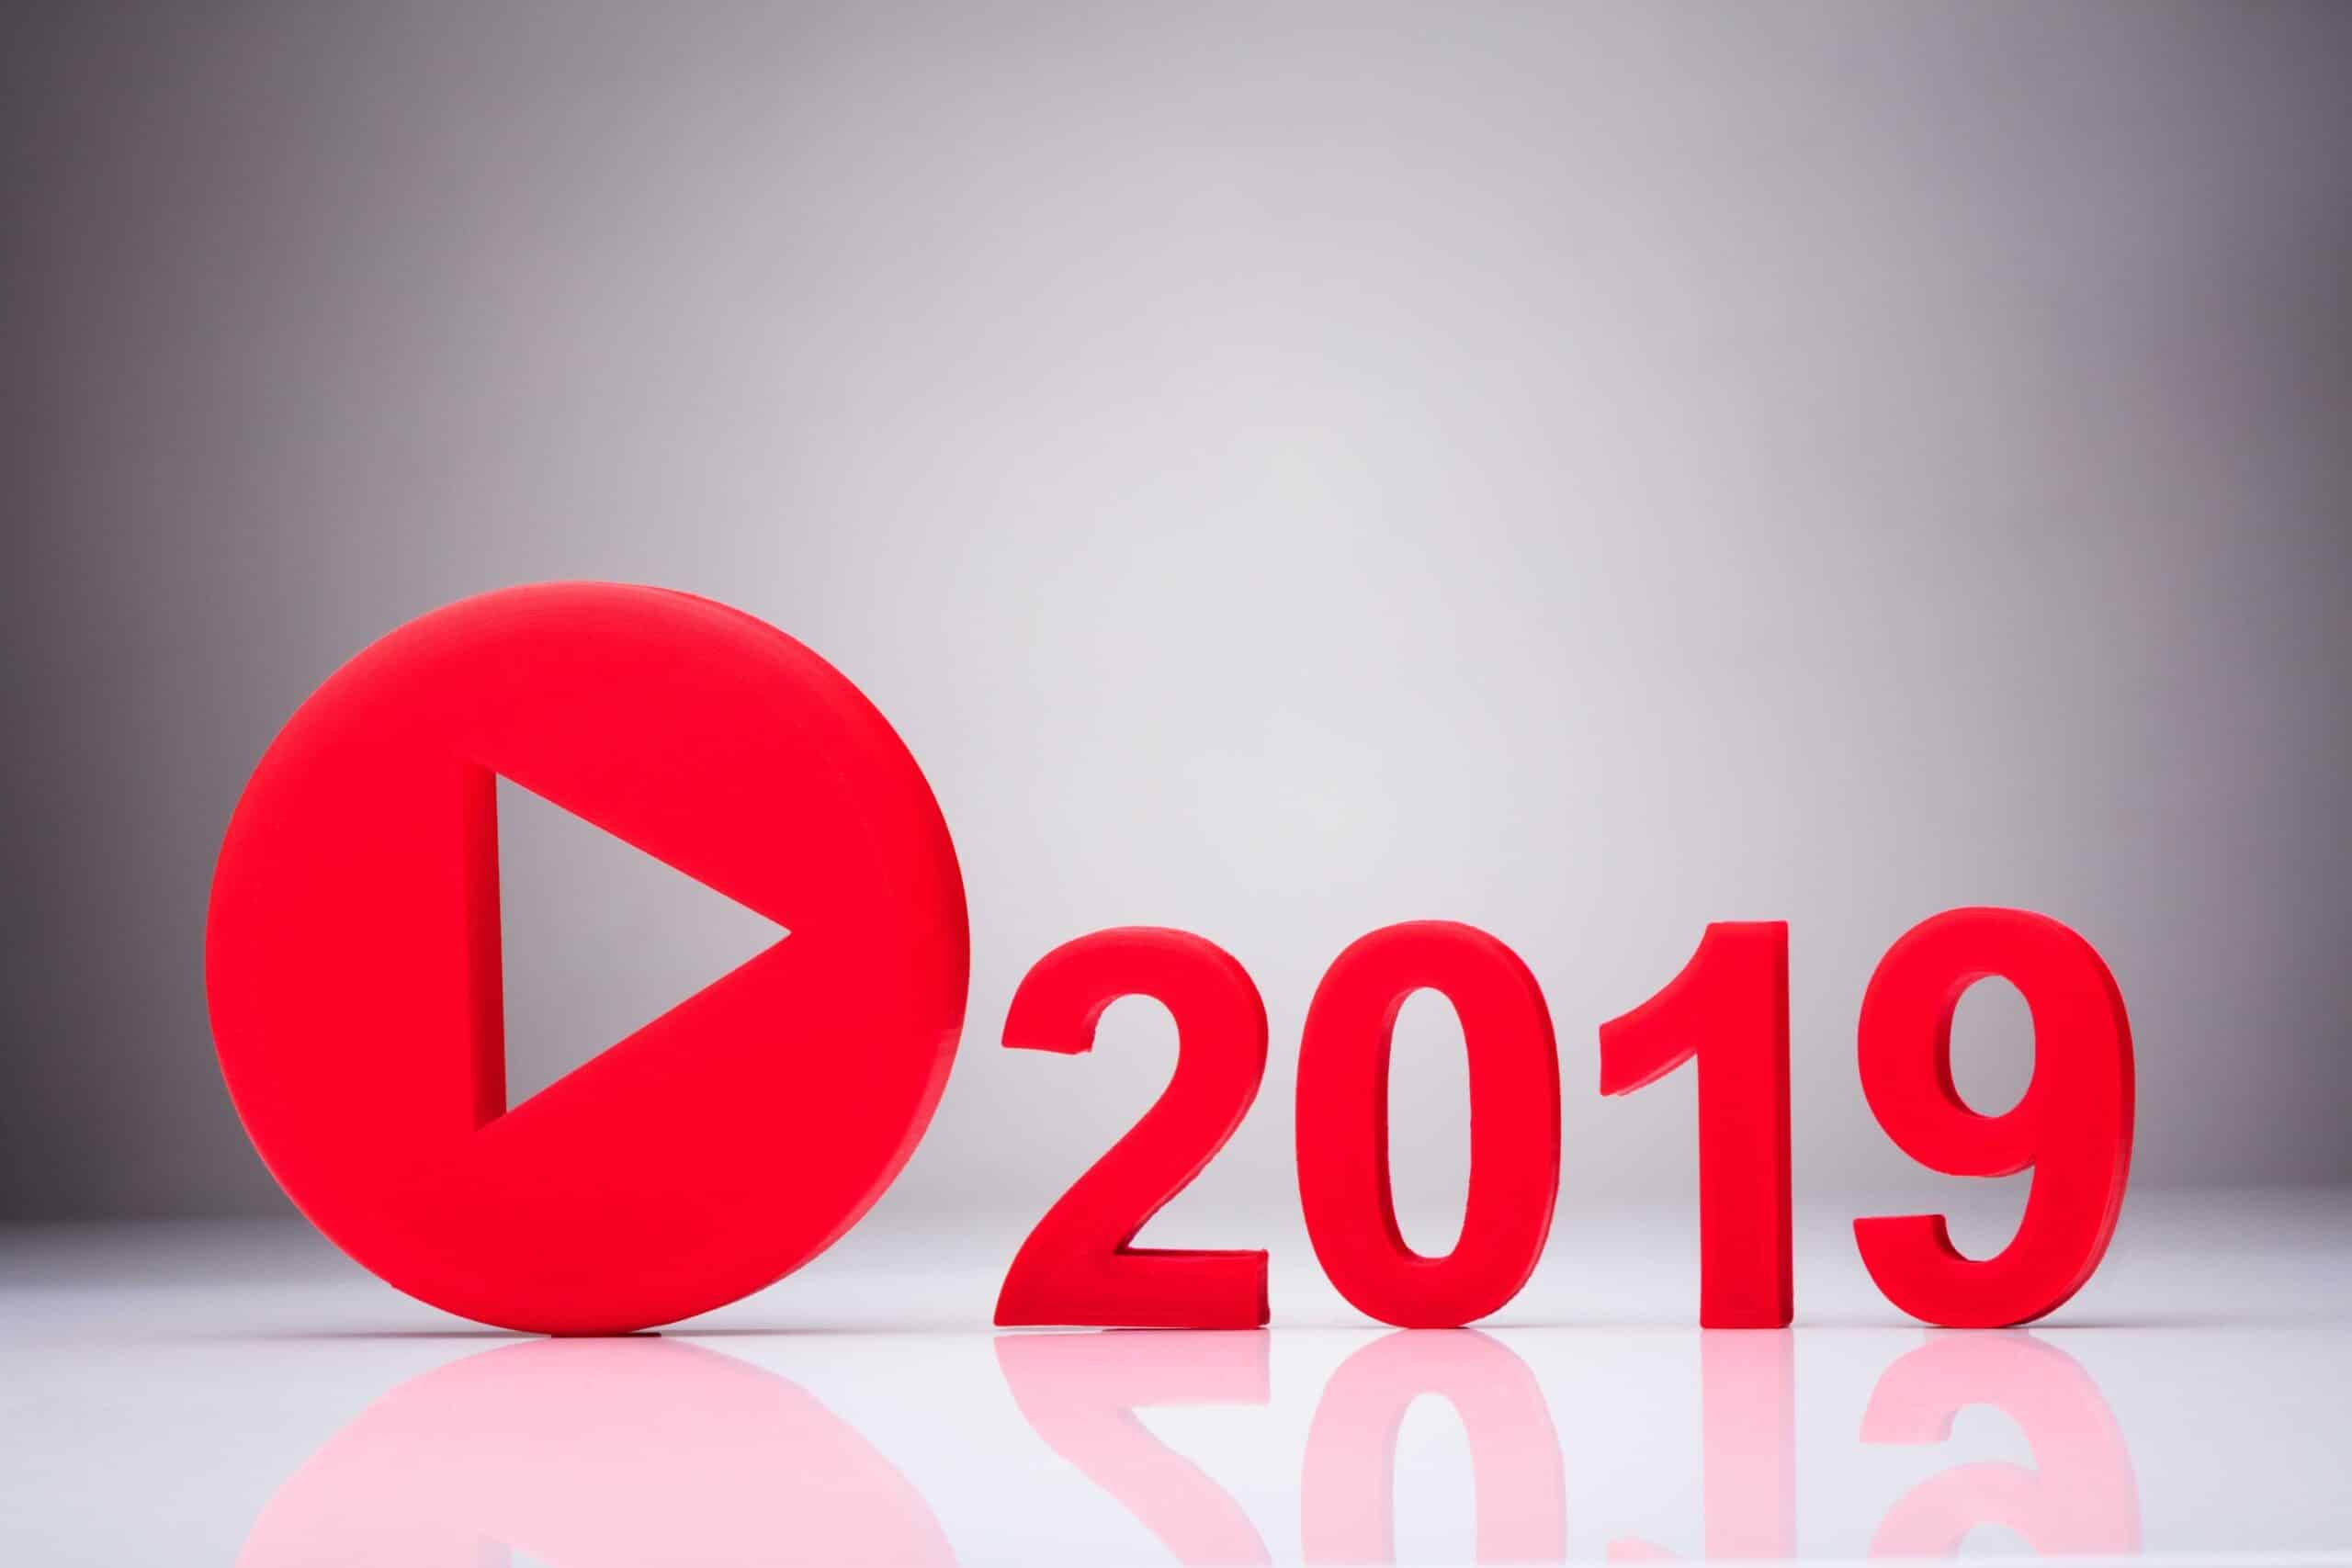 Top 19 Video Marketing Statistics for 2019